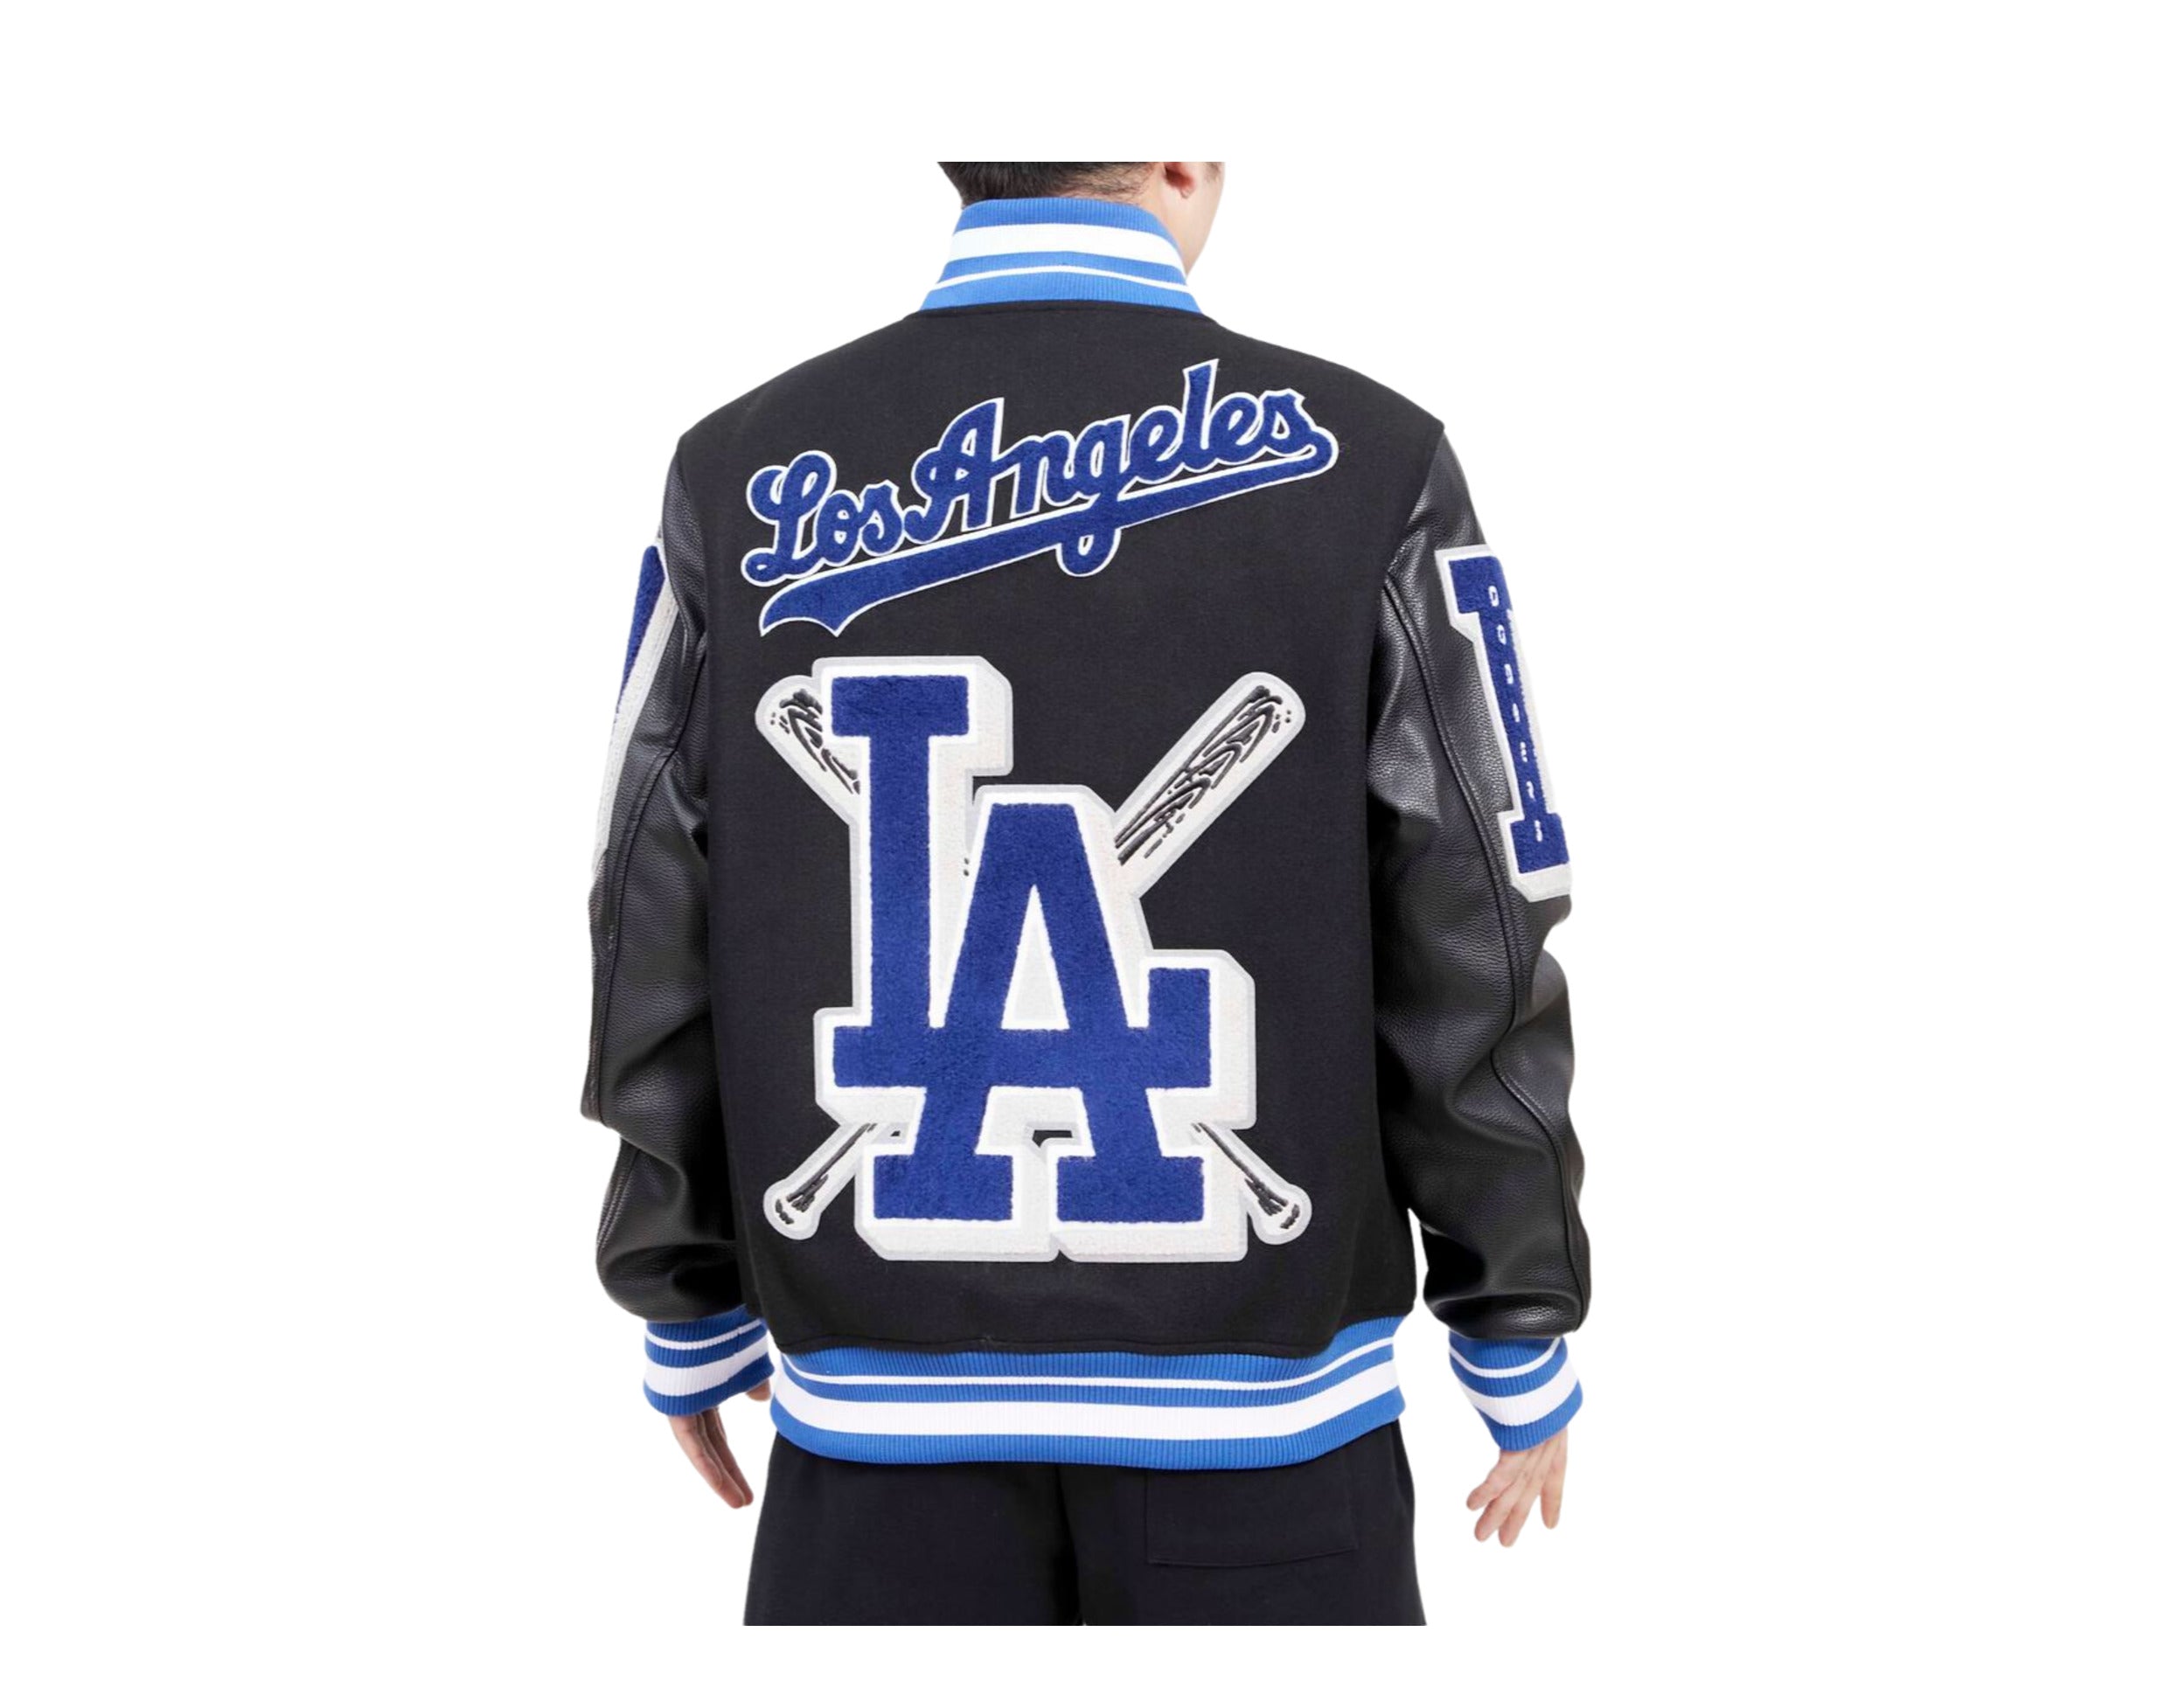 Chalkline Baseball Style Jacket – La Dodgers – Satin – Button-up As-is